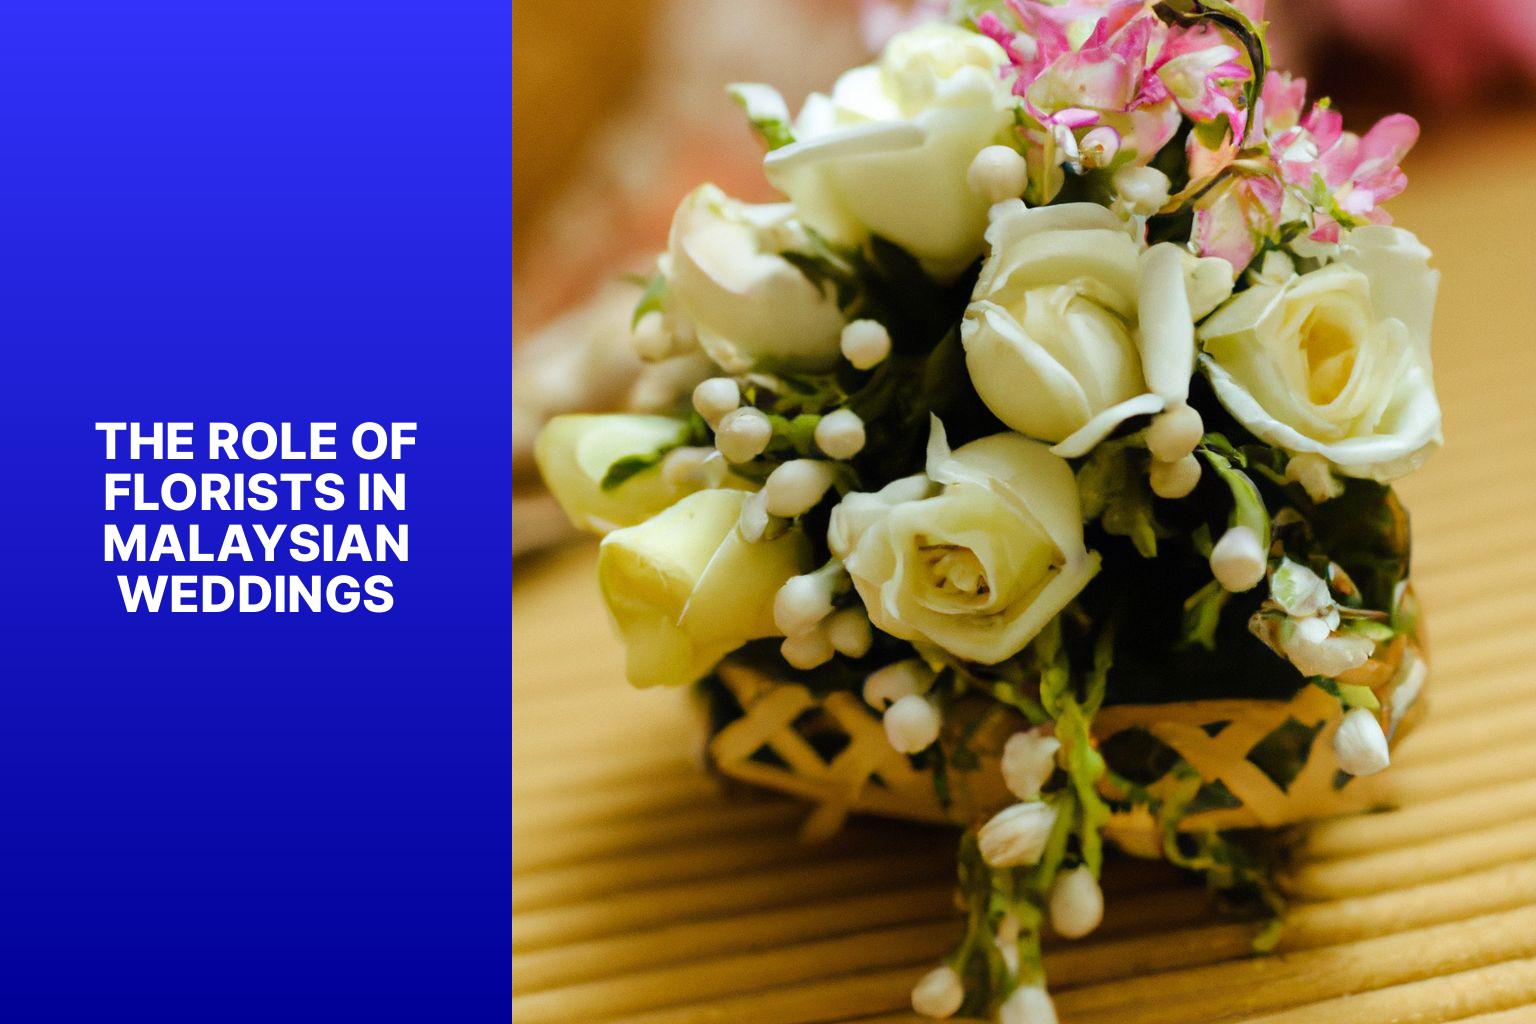 The Role of Florists in Malaysian Weddings